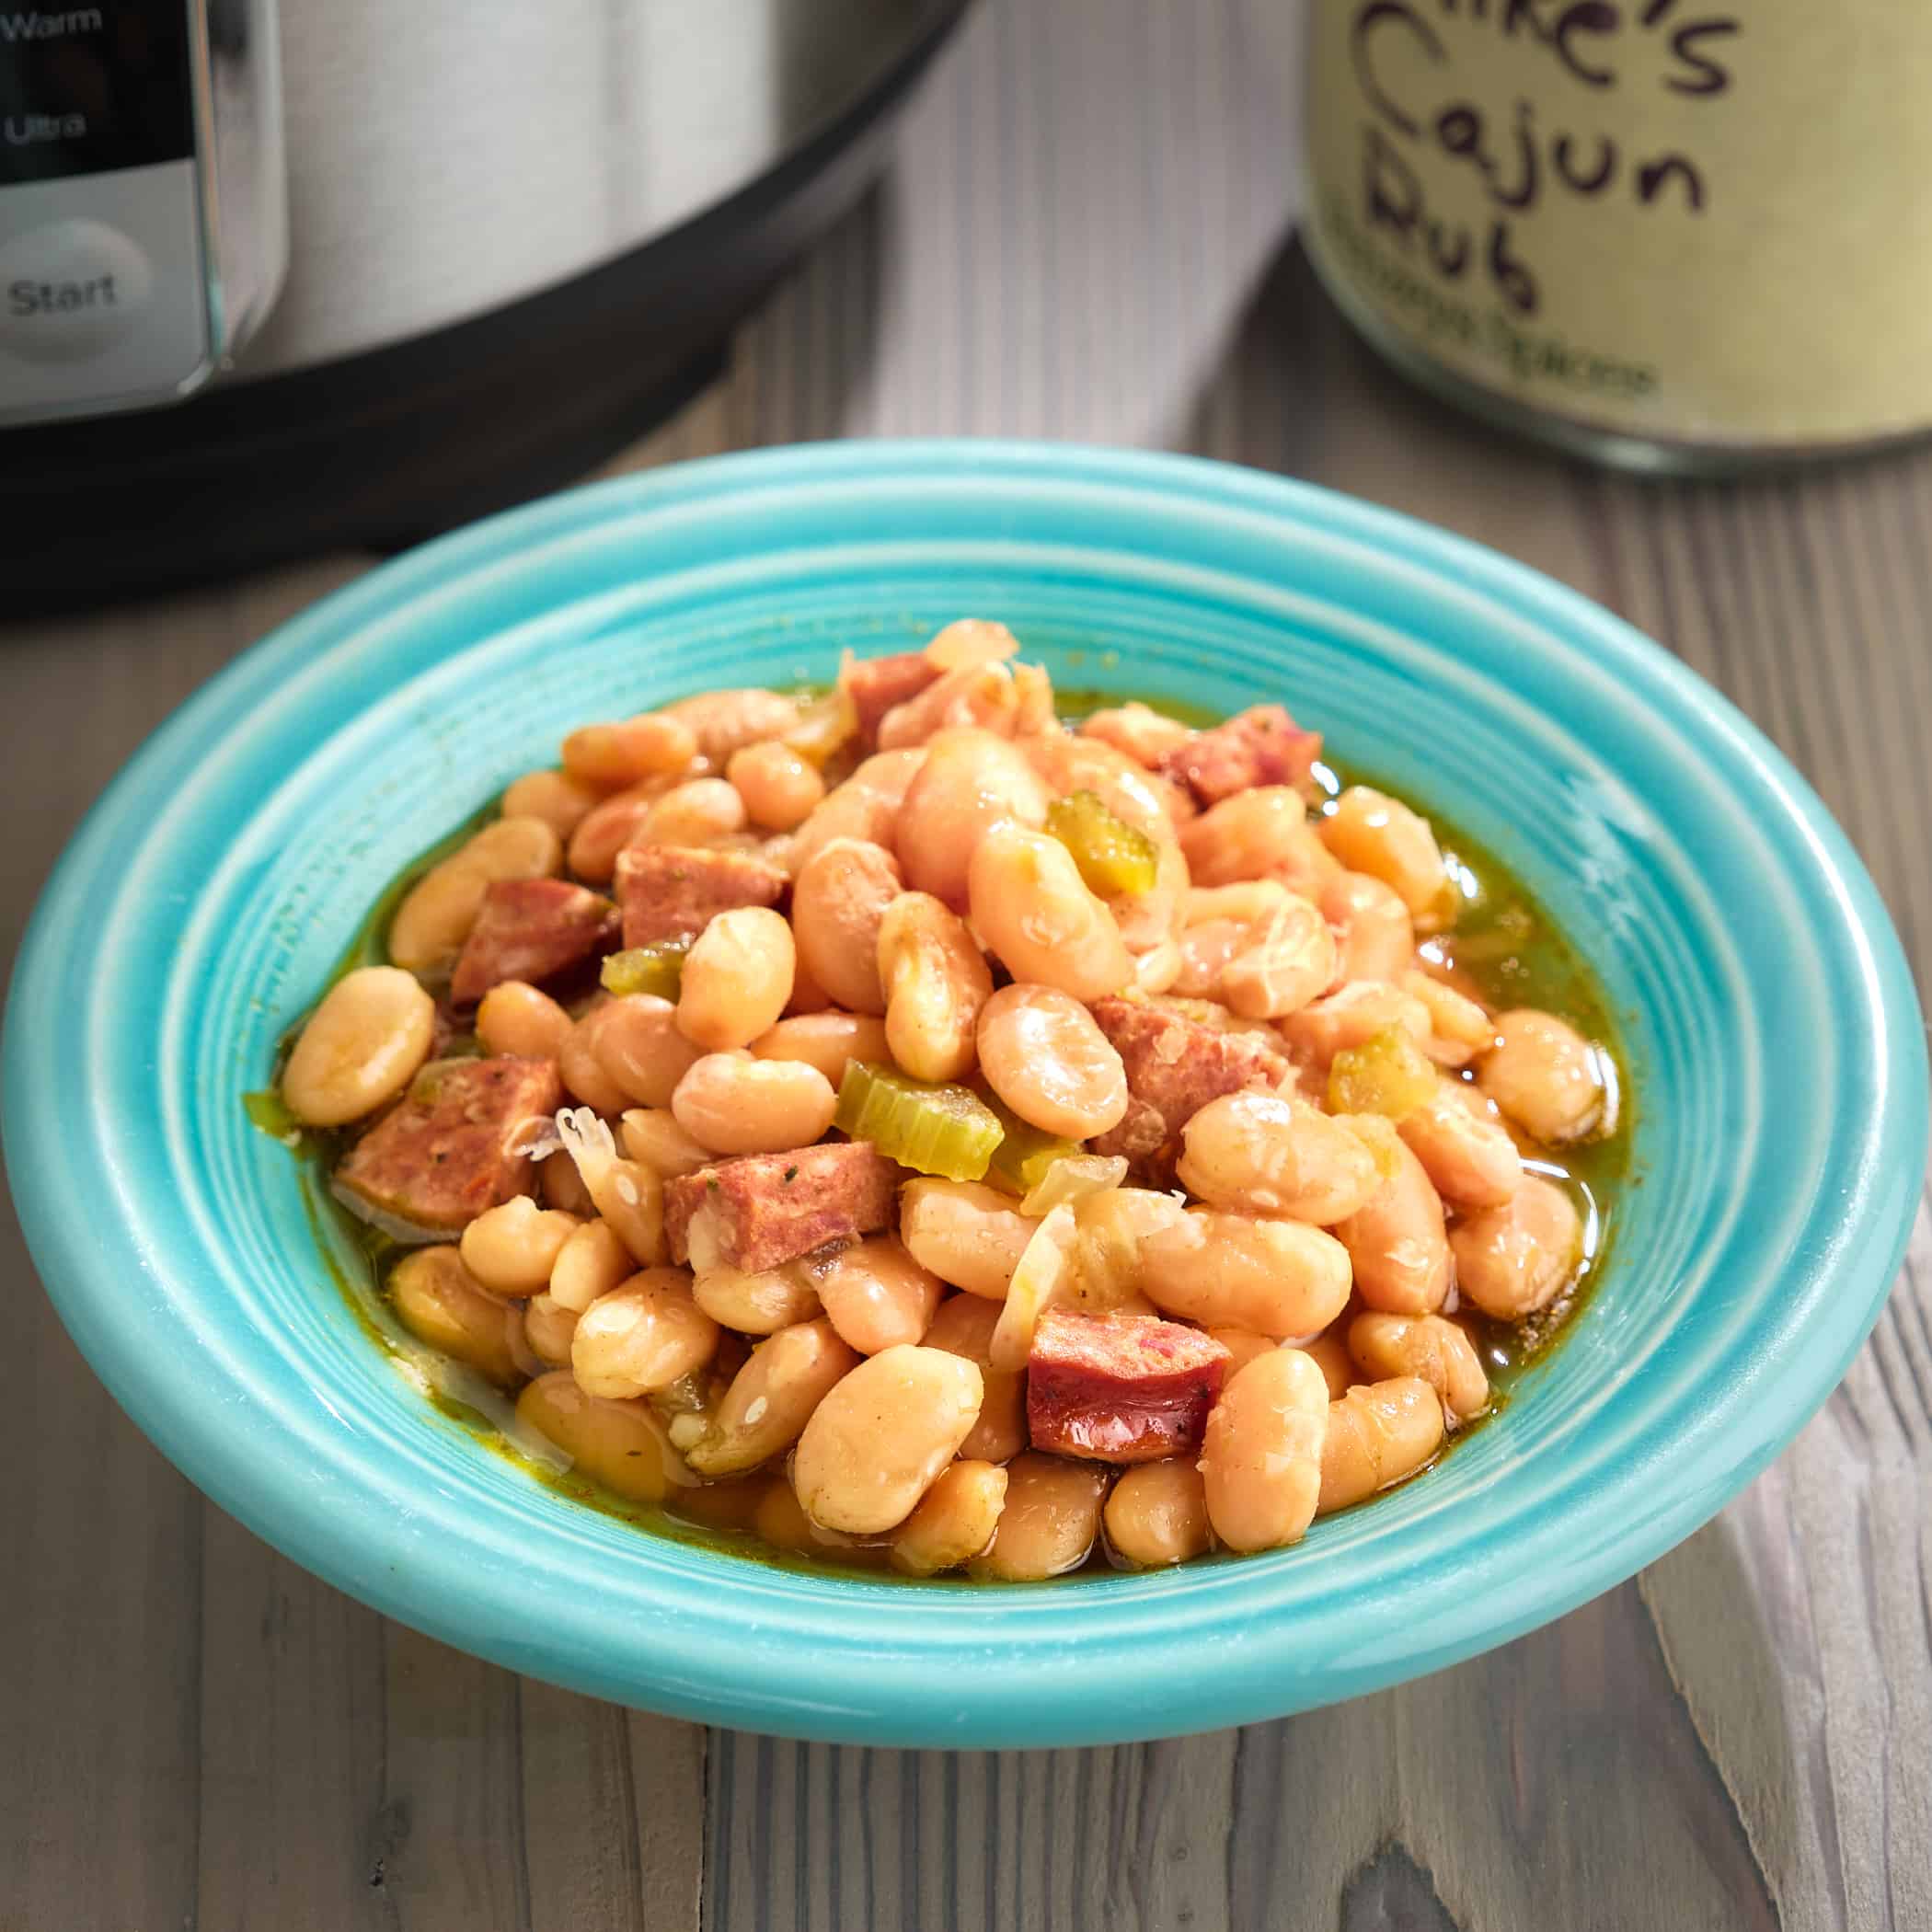 A bowl of cajun white beans, with sausage and green peppers, in front of an Instant Pot and a jar of Cajun seasoning